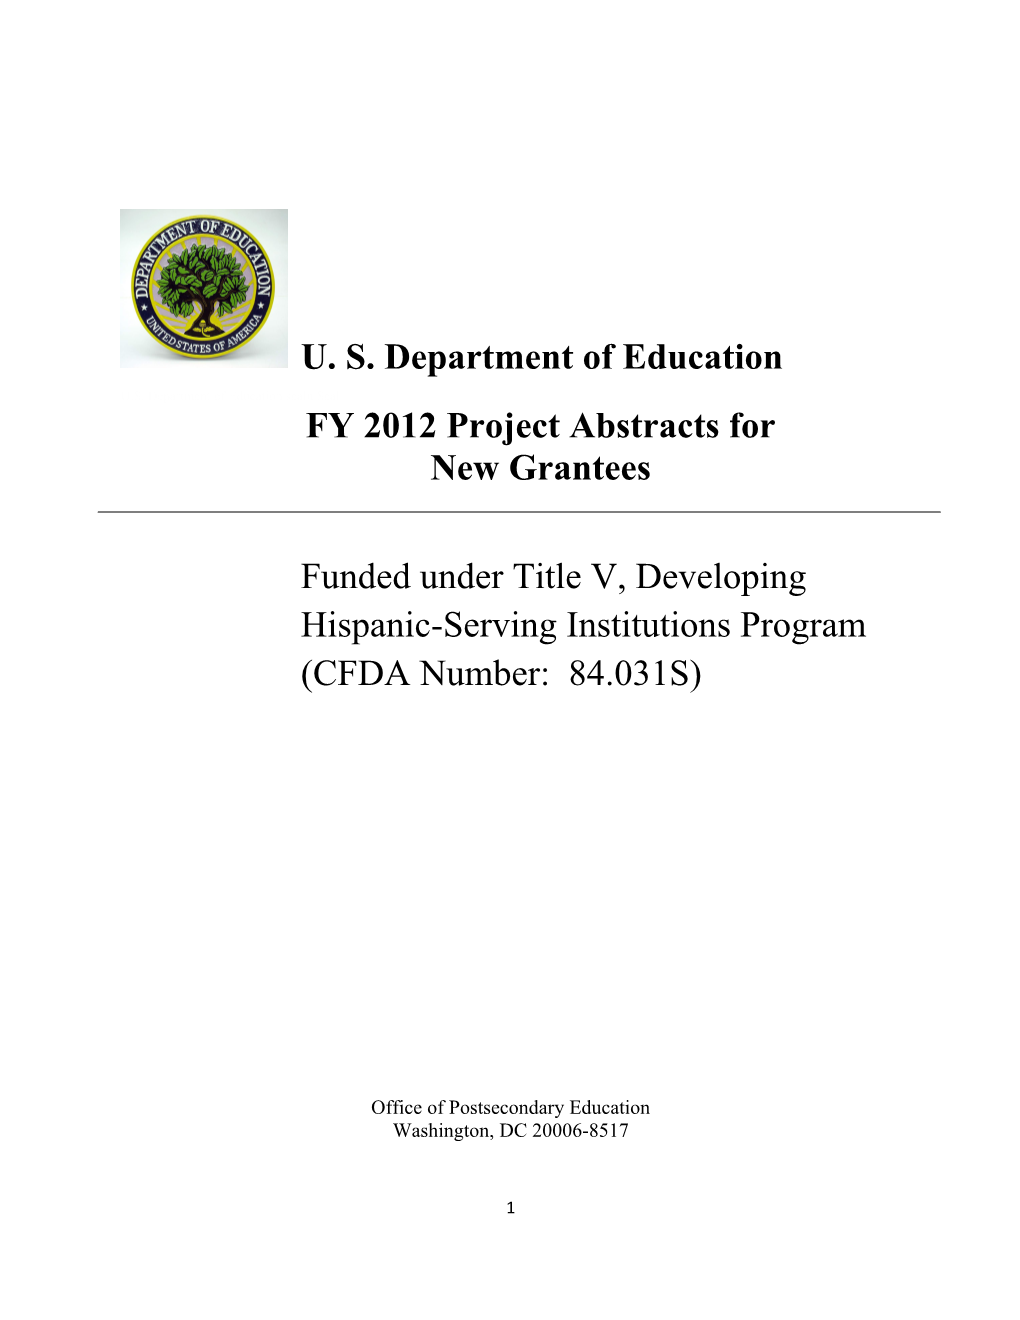 FY 2012 Project Abstracts for New Grantees Under the Title V Developing Hispanic-Serving